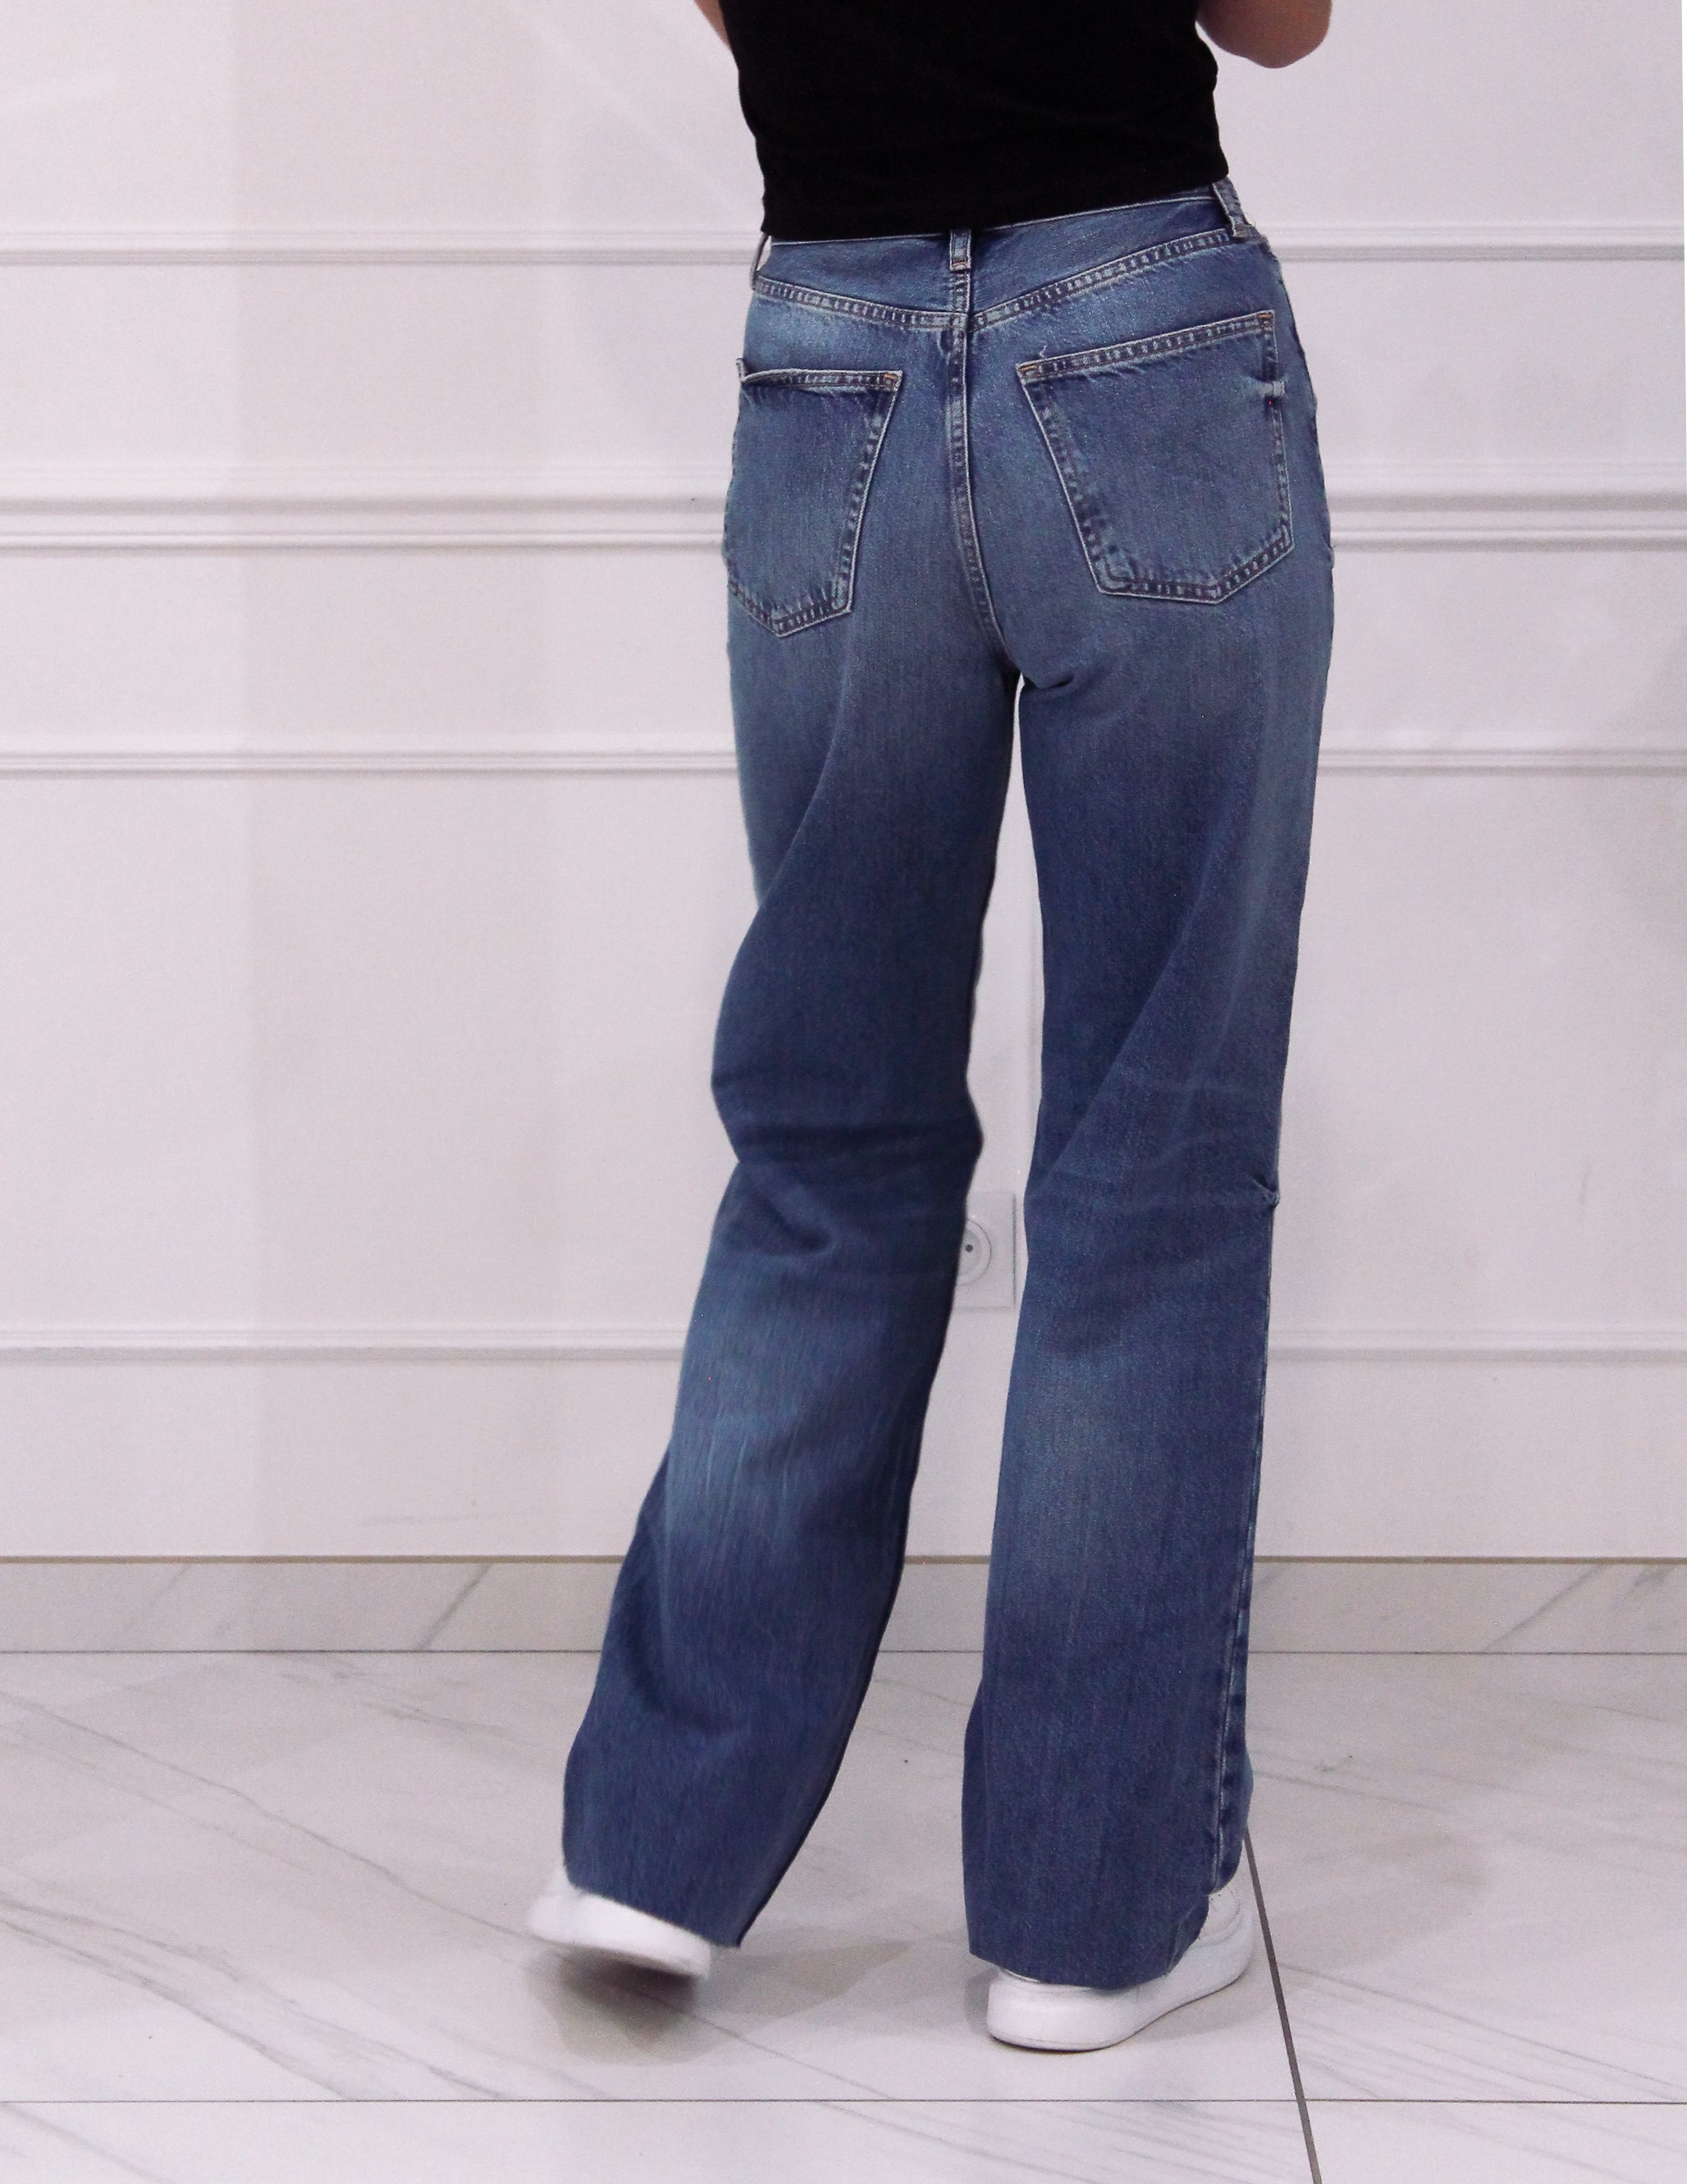 Wide straight cut jeans